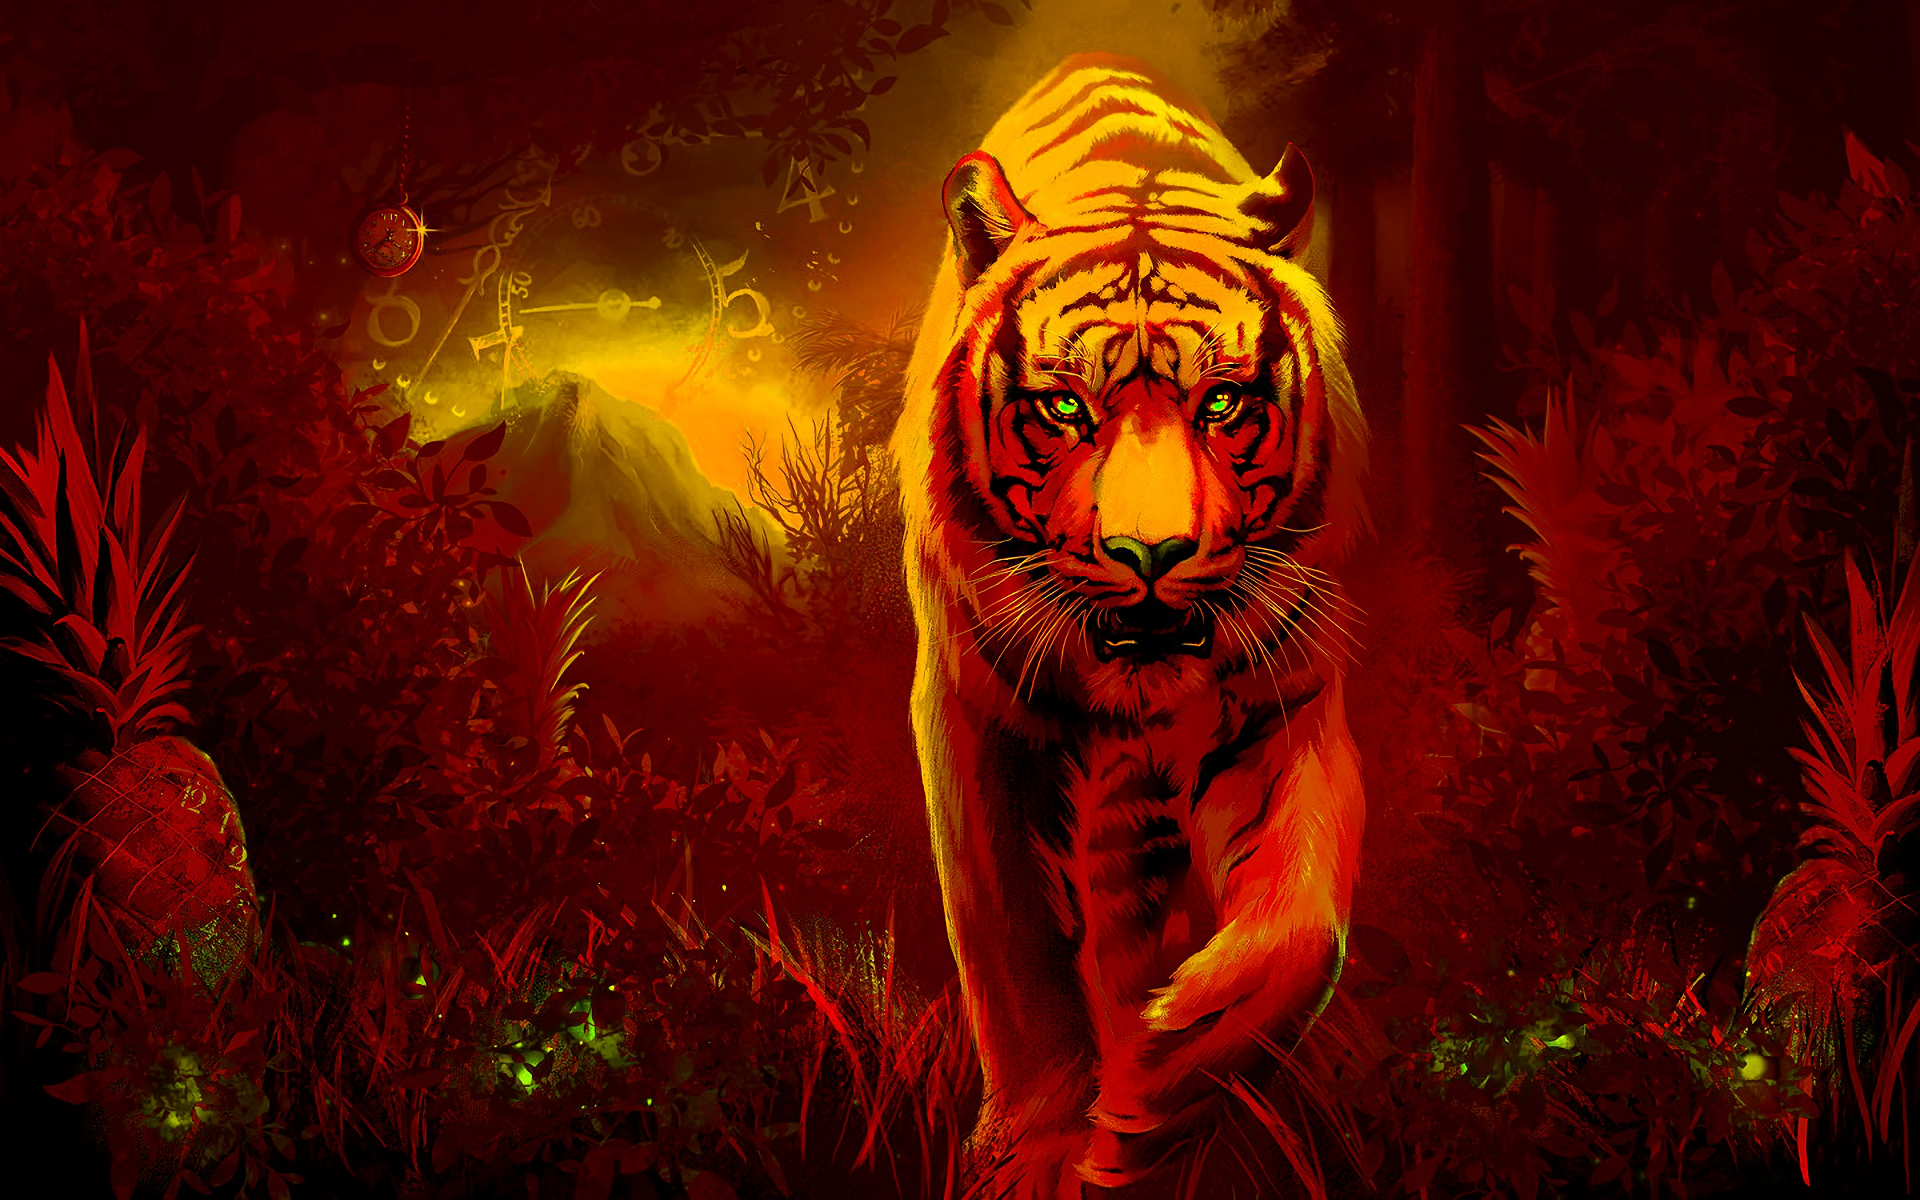 Red Tigers